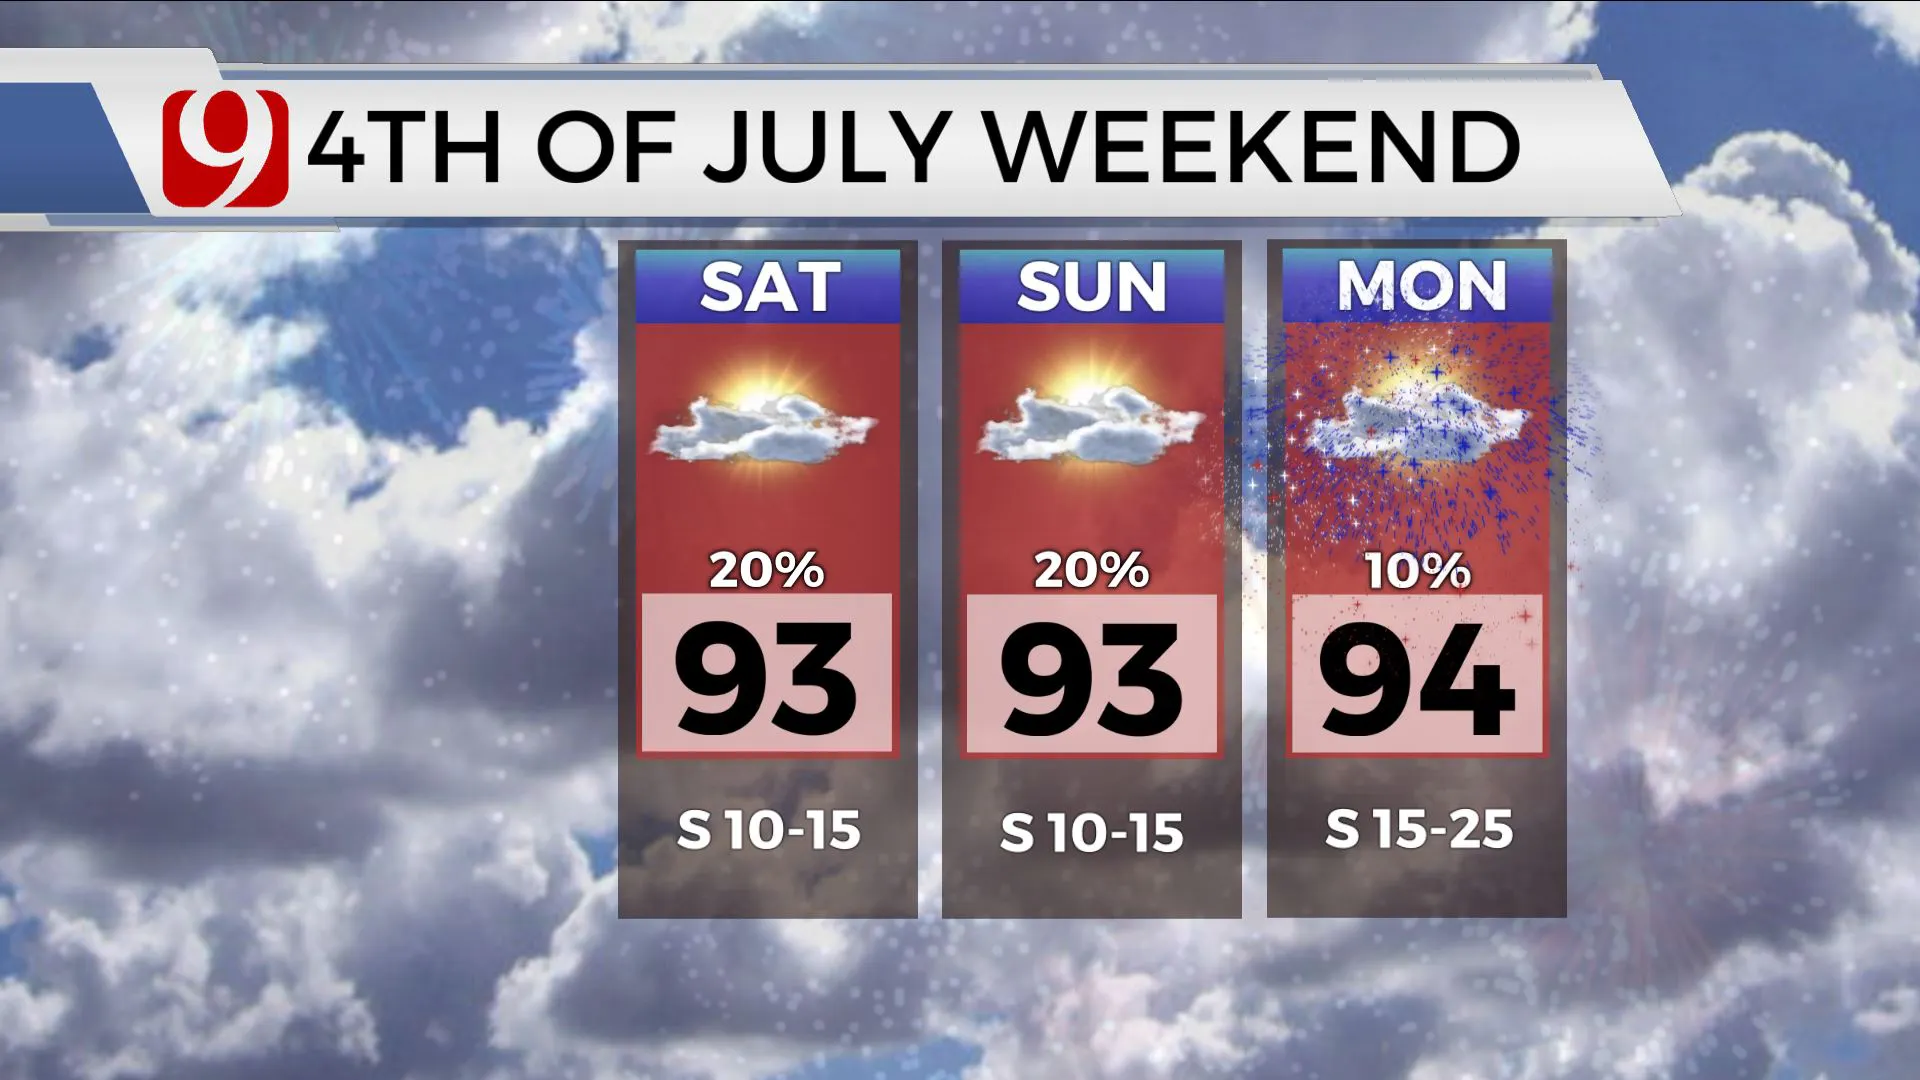 JULY 4TH WEEKEND WEATHER